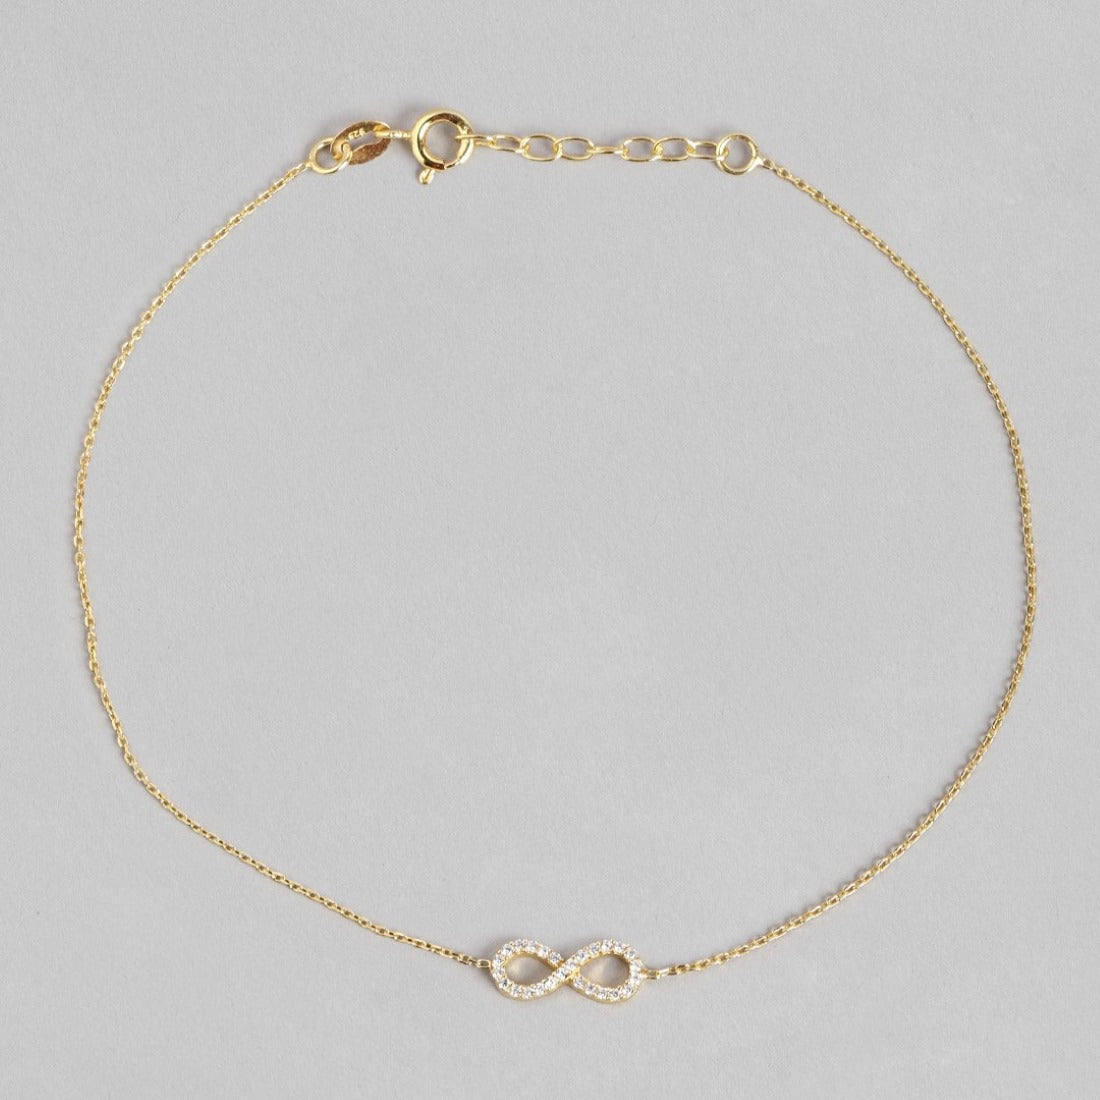 Infinite Glamour Gold-Plated 925 Sterling Silver Anklet with Cubic Zirconia